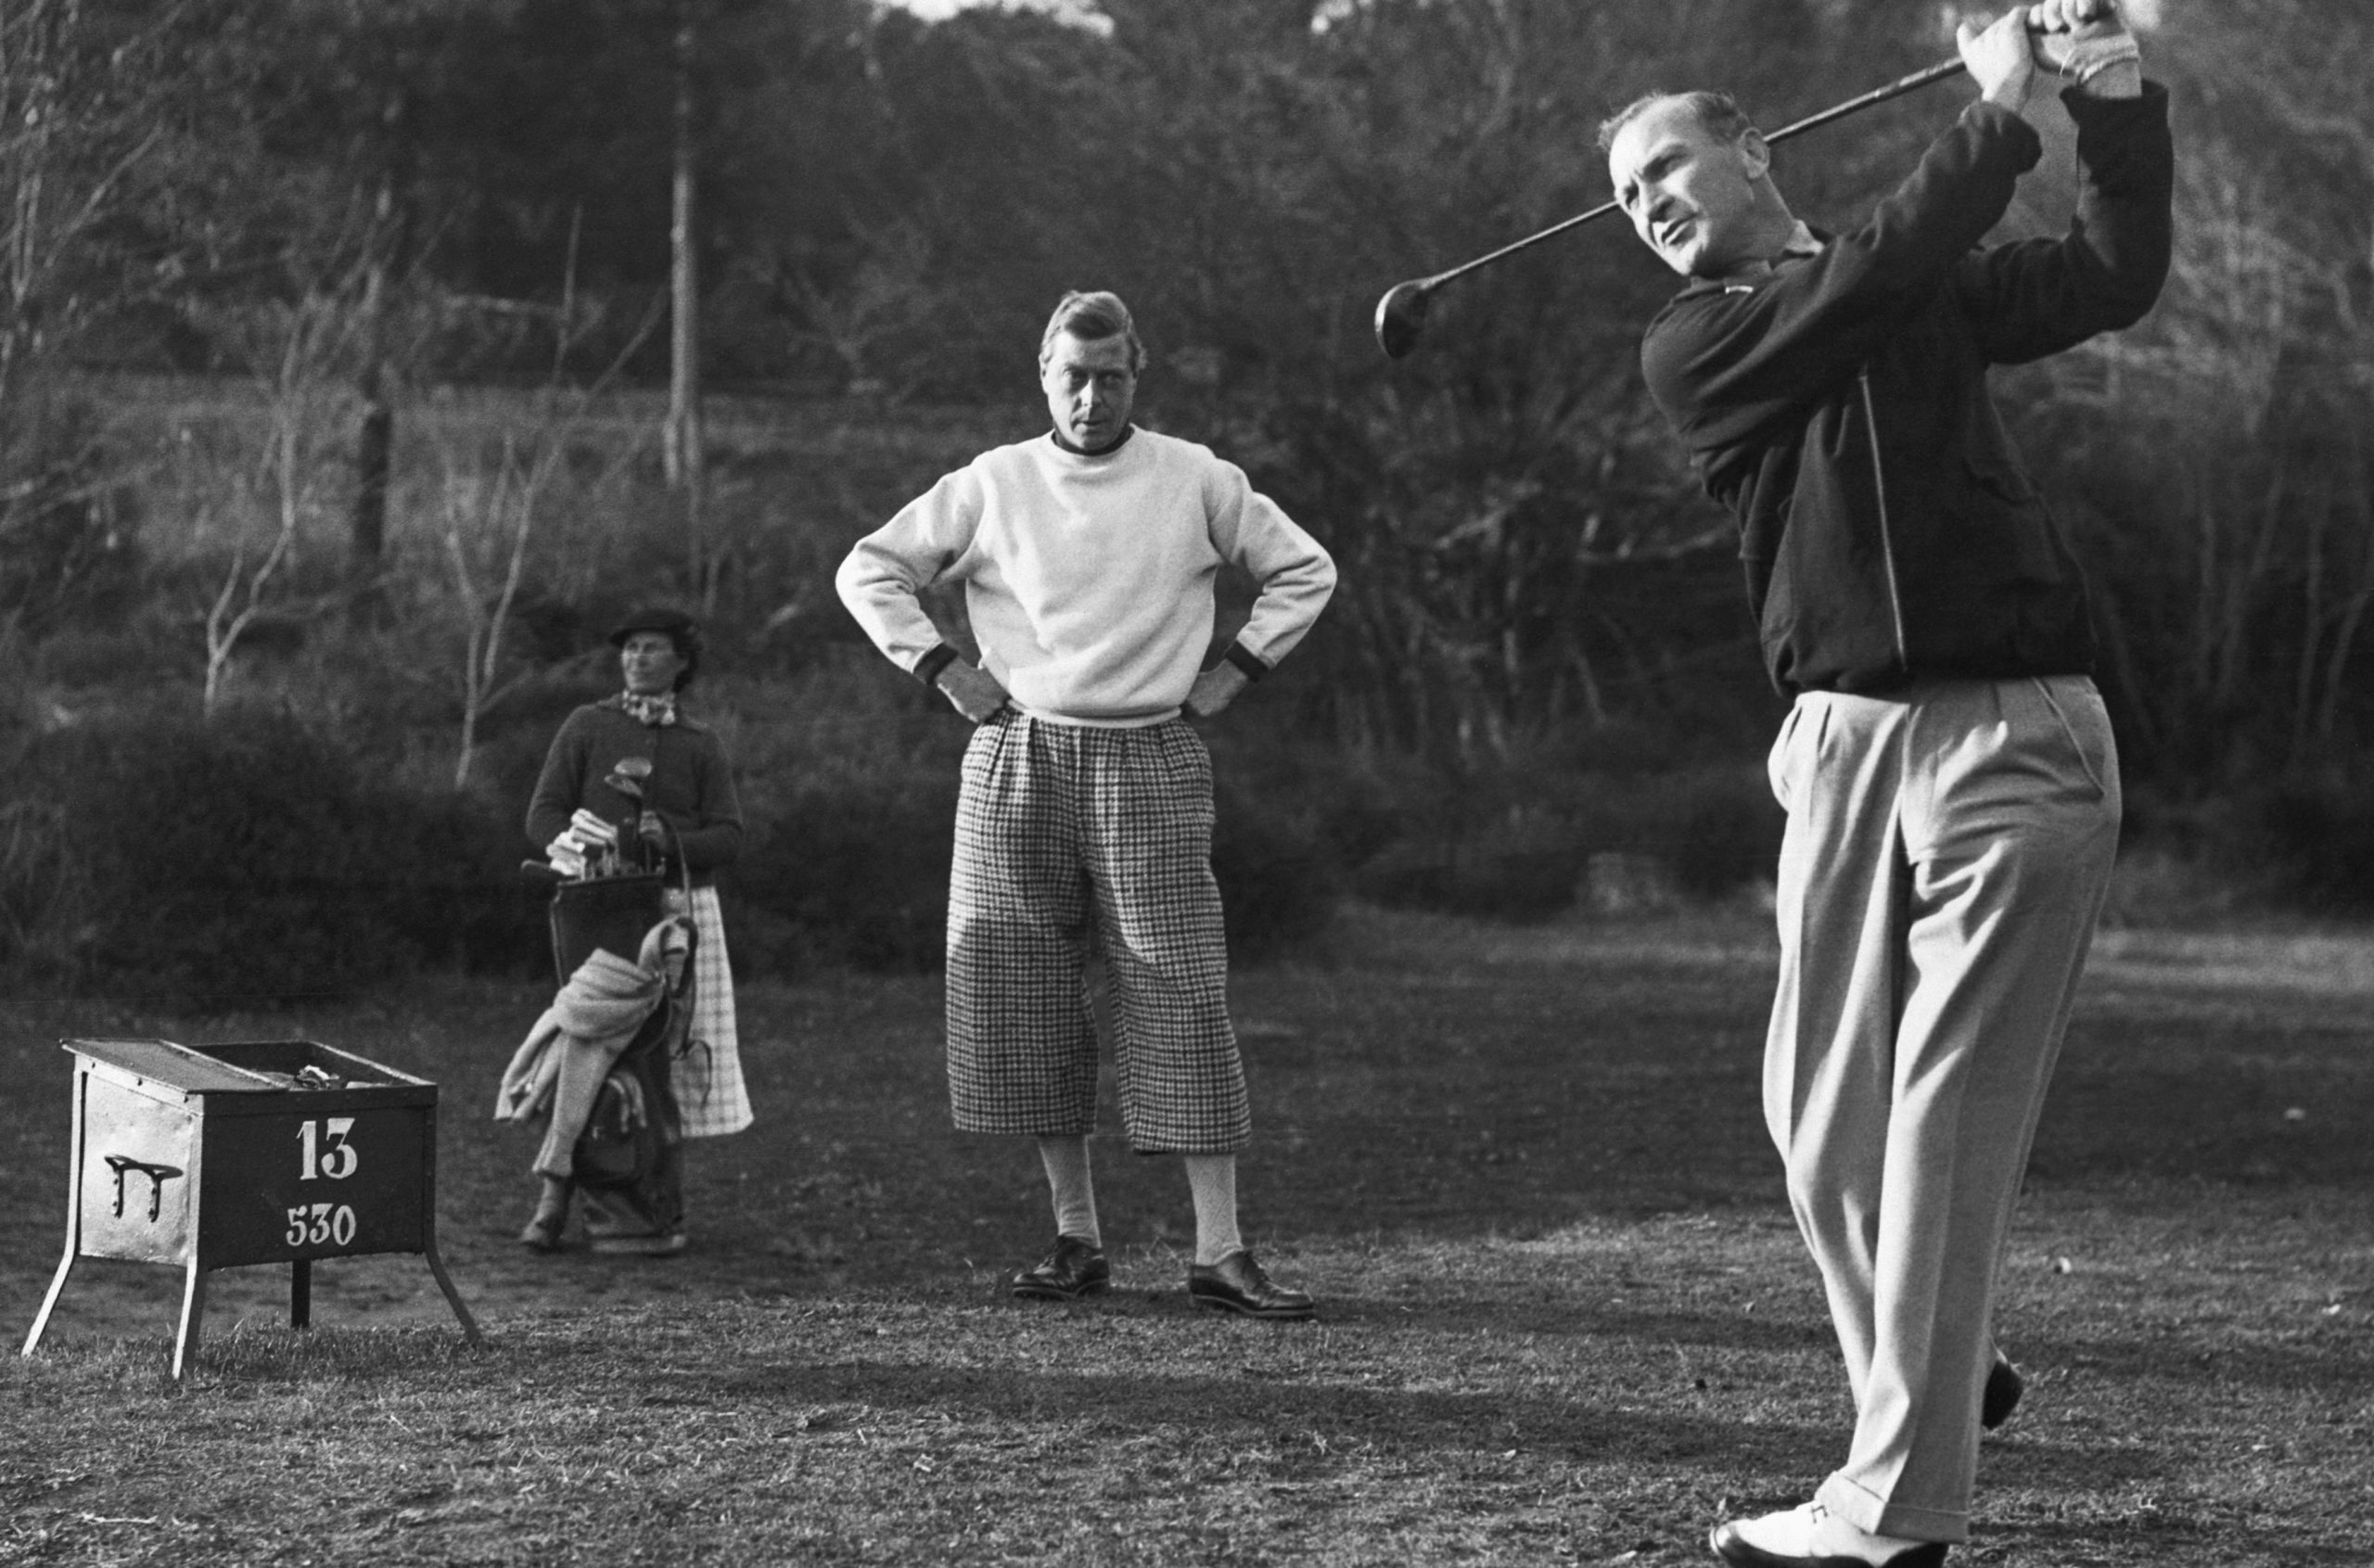 Archie Compston and Duke Play Golf